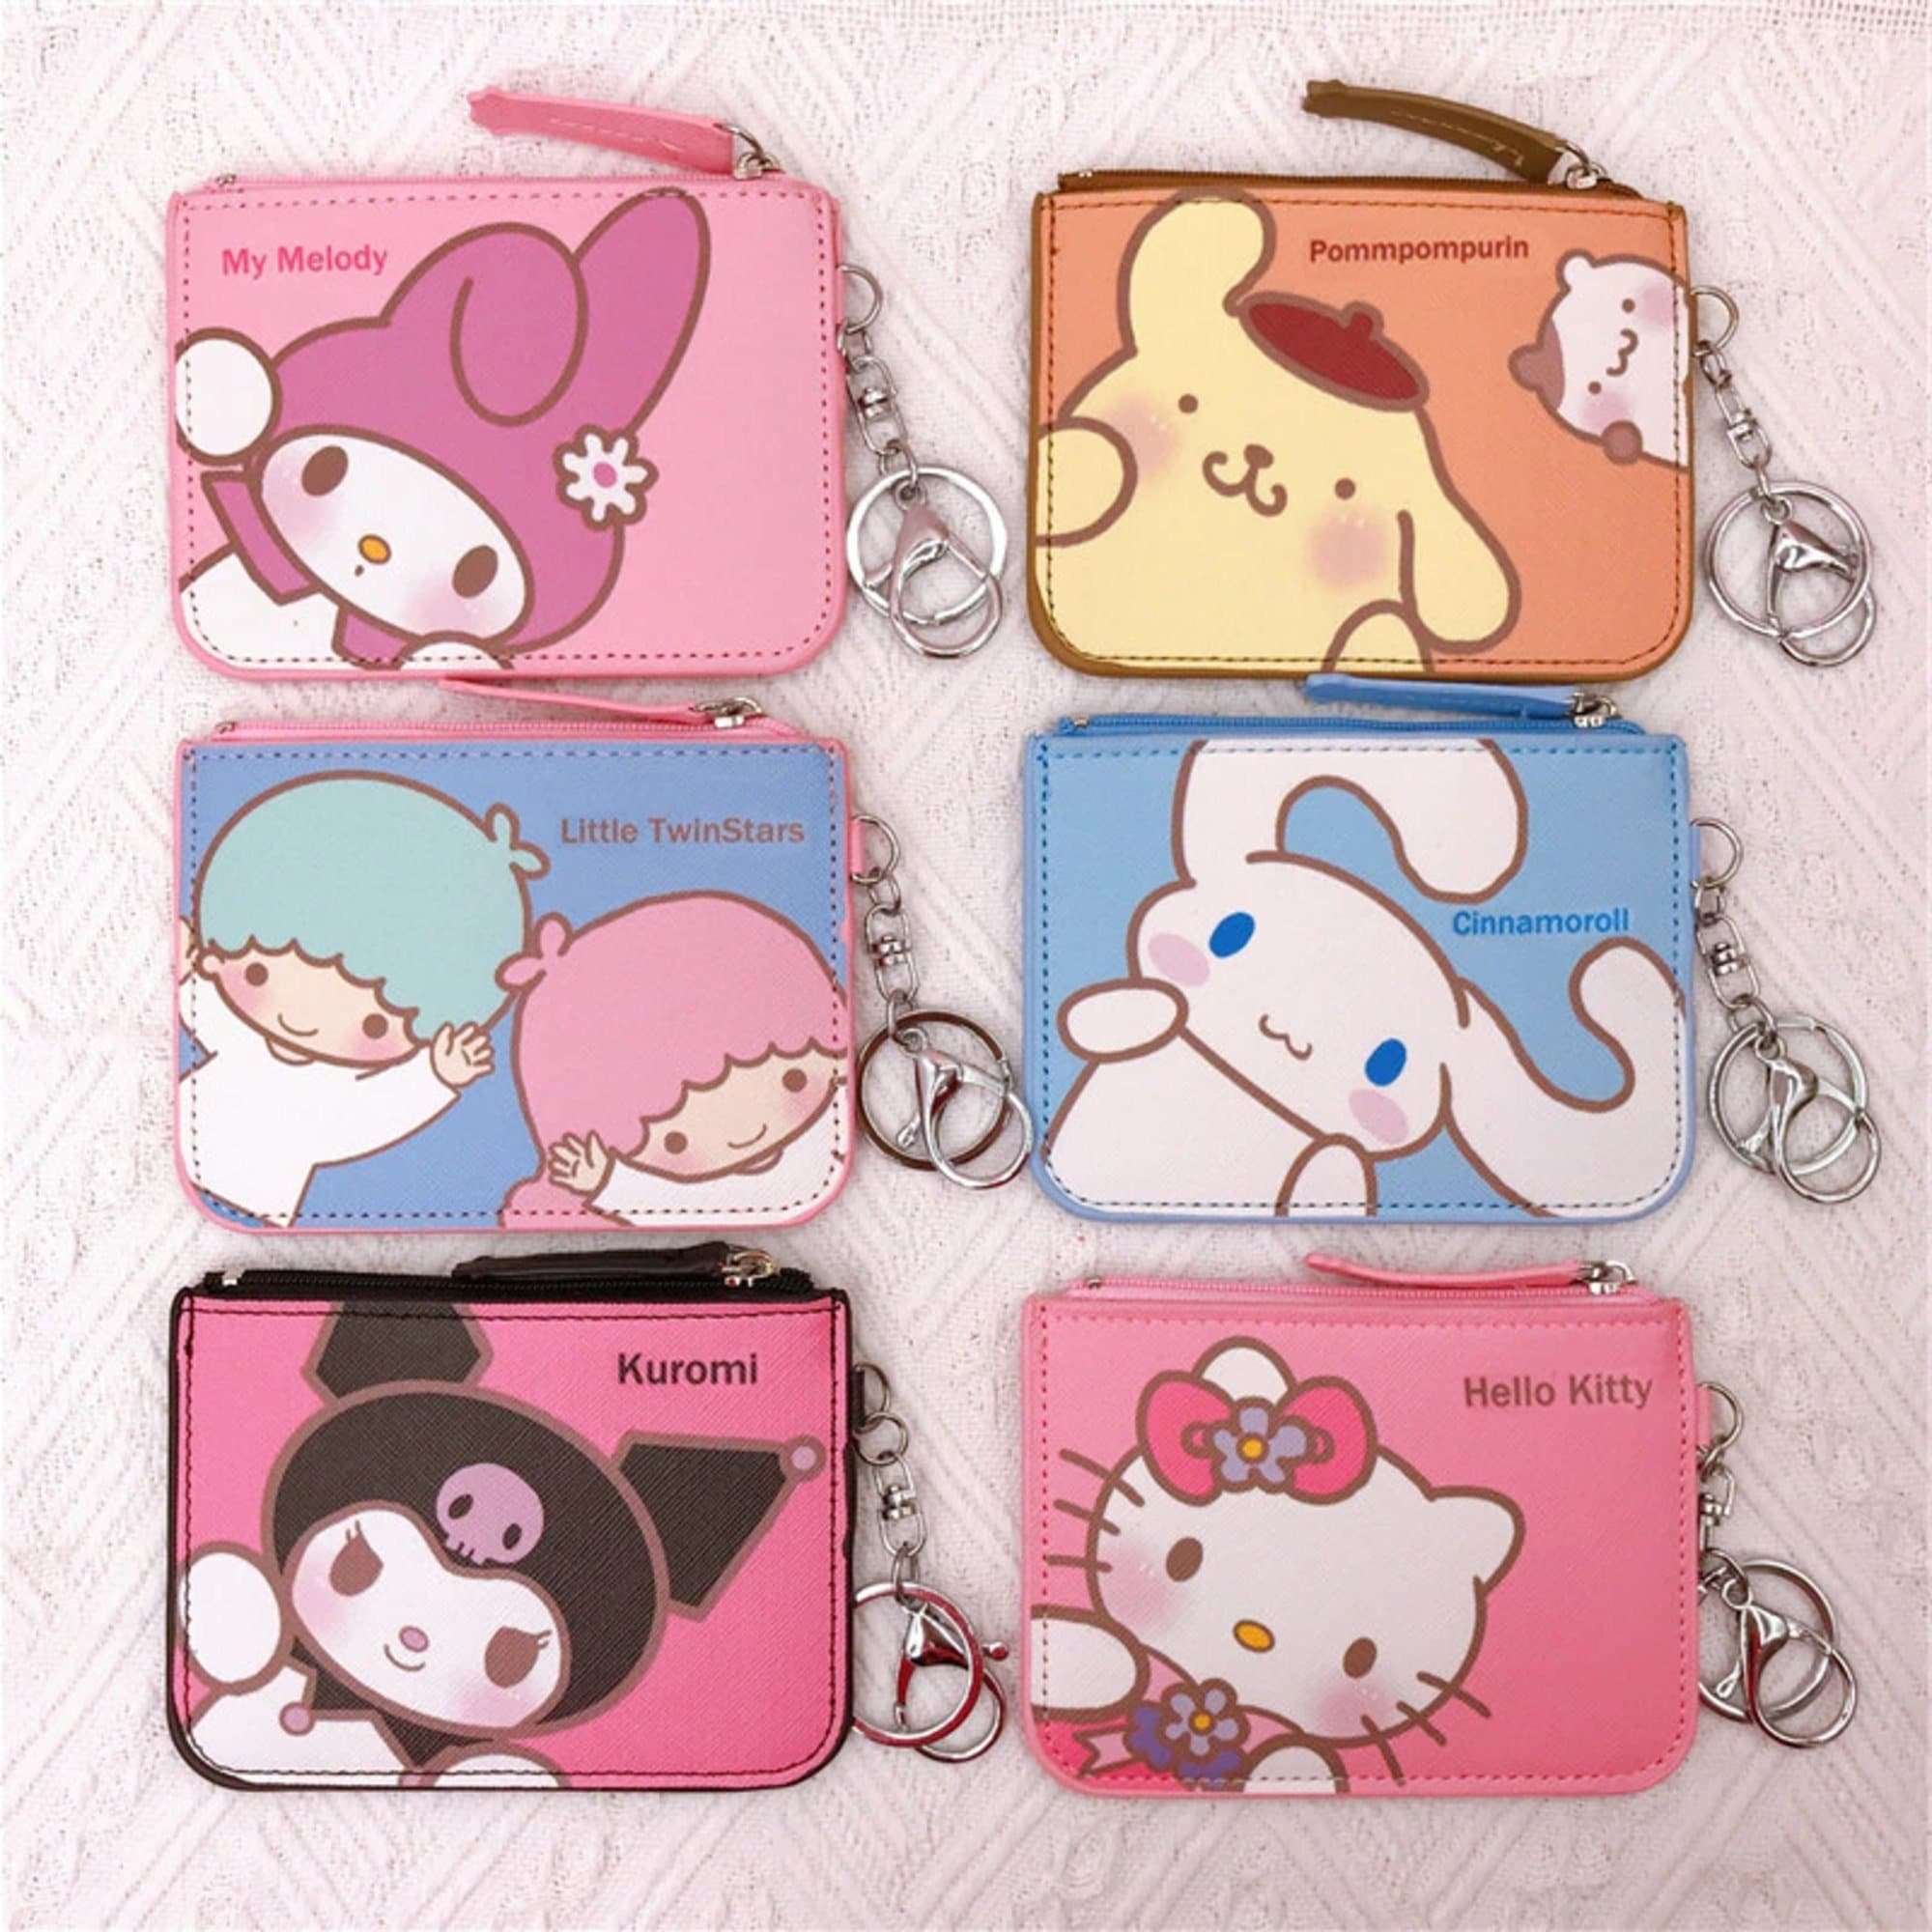  Hello Kitty Plush Keychain Bag Clip Coin Purse Party Favors -  Bundle with 4 Plush Keychain for Bags, Stickers : Toys & Games